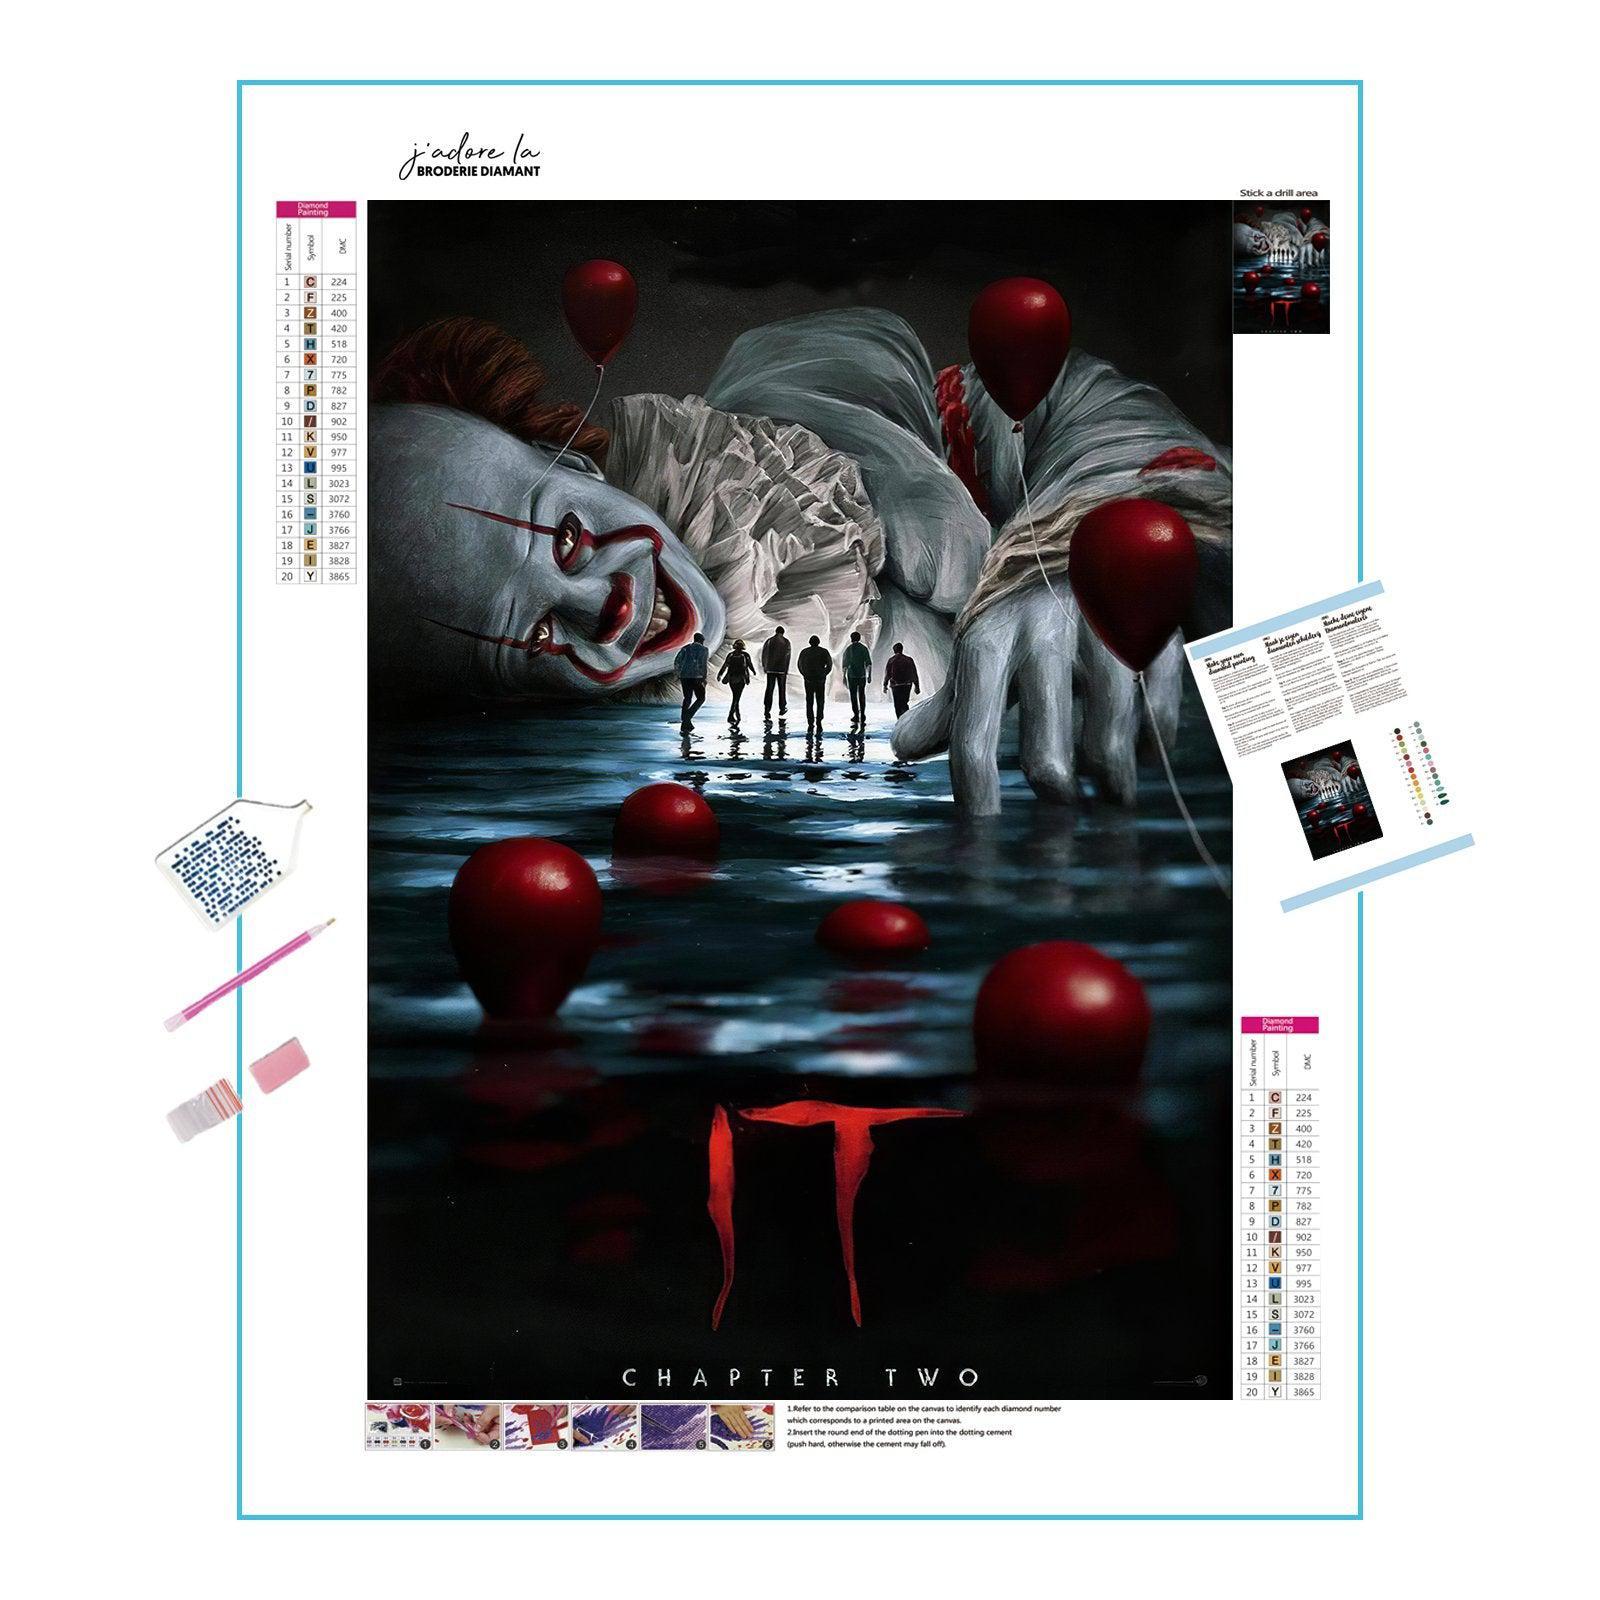 Dive into the horror of It Pennywise in vibrant color.It Pennywise - Diamondartlove